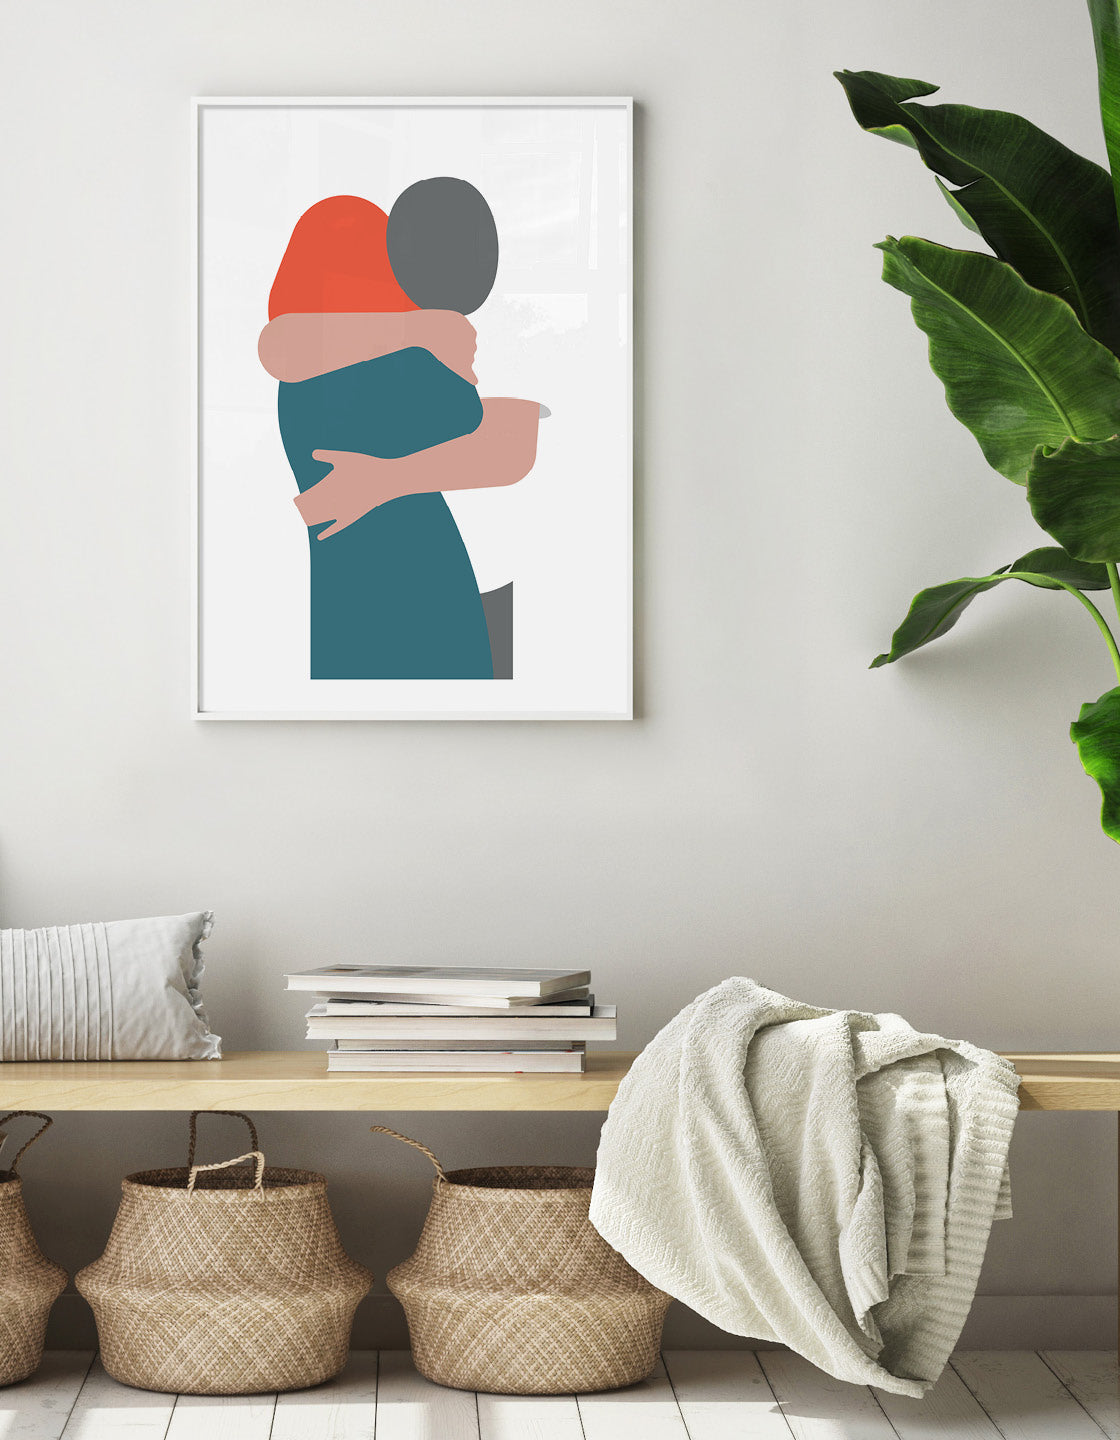 White art print depicting a woman with red hair in an embrace with a man wearing a white tshirt leaning over her shoulder a couple hugging.